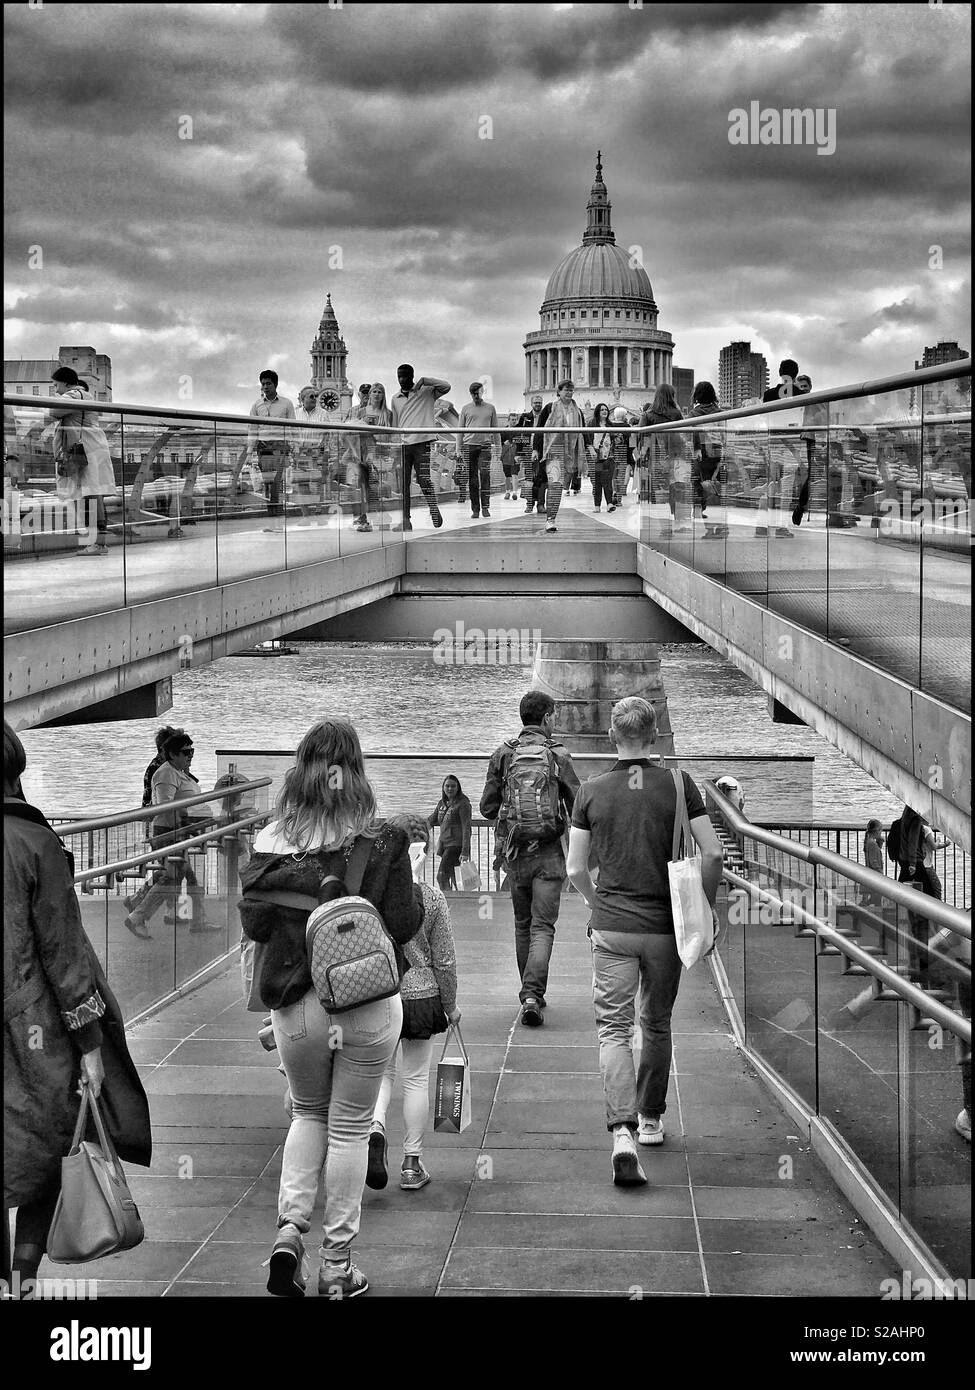 Looking north from the South Bank of The River Thames along The Millennium Bridge toward St. Paul’s Cathedral. Thousands of people walk over this iconic bridge every day. Photo Credit -© COLIN HOSKINS Stock Photo